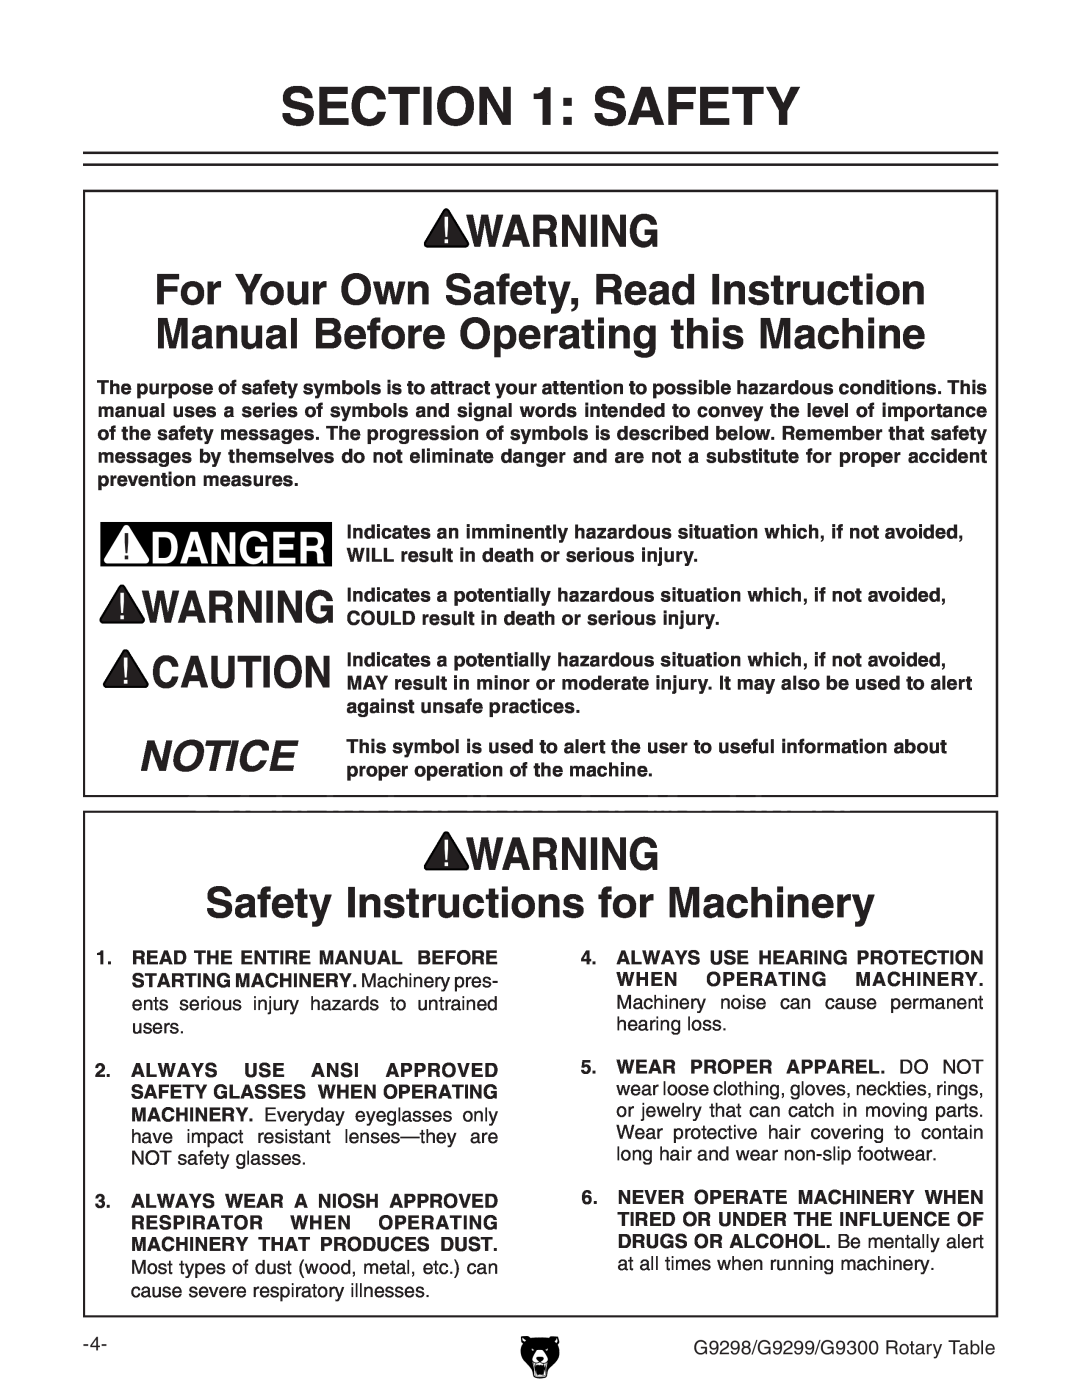 Grizzly G9298 Safety Instructions for Machinery, Indicates an imminently hazardous situation which, if not avoided 